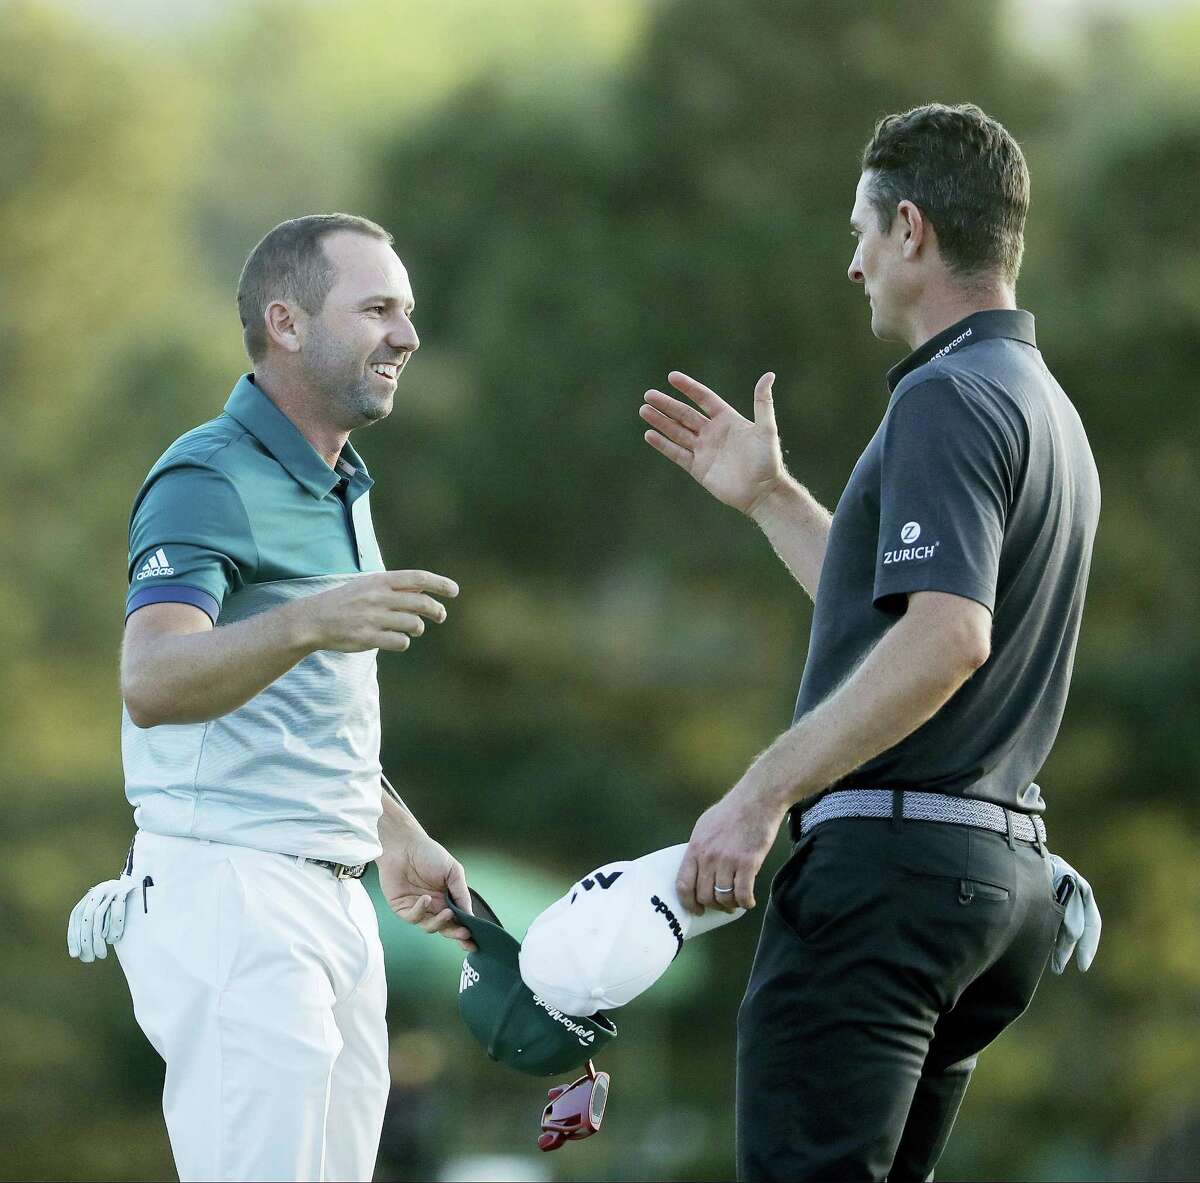 Sergio Garcia, of Spain, talks to Justin Rose, of England, after making his birdie putt on the 18th green to win the Masters golf tournament after a playoff Sunday in Augusta, Ga.